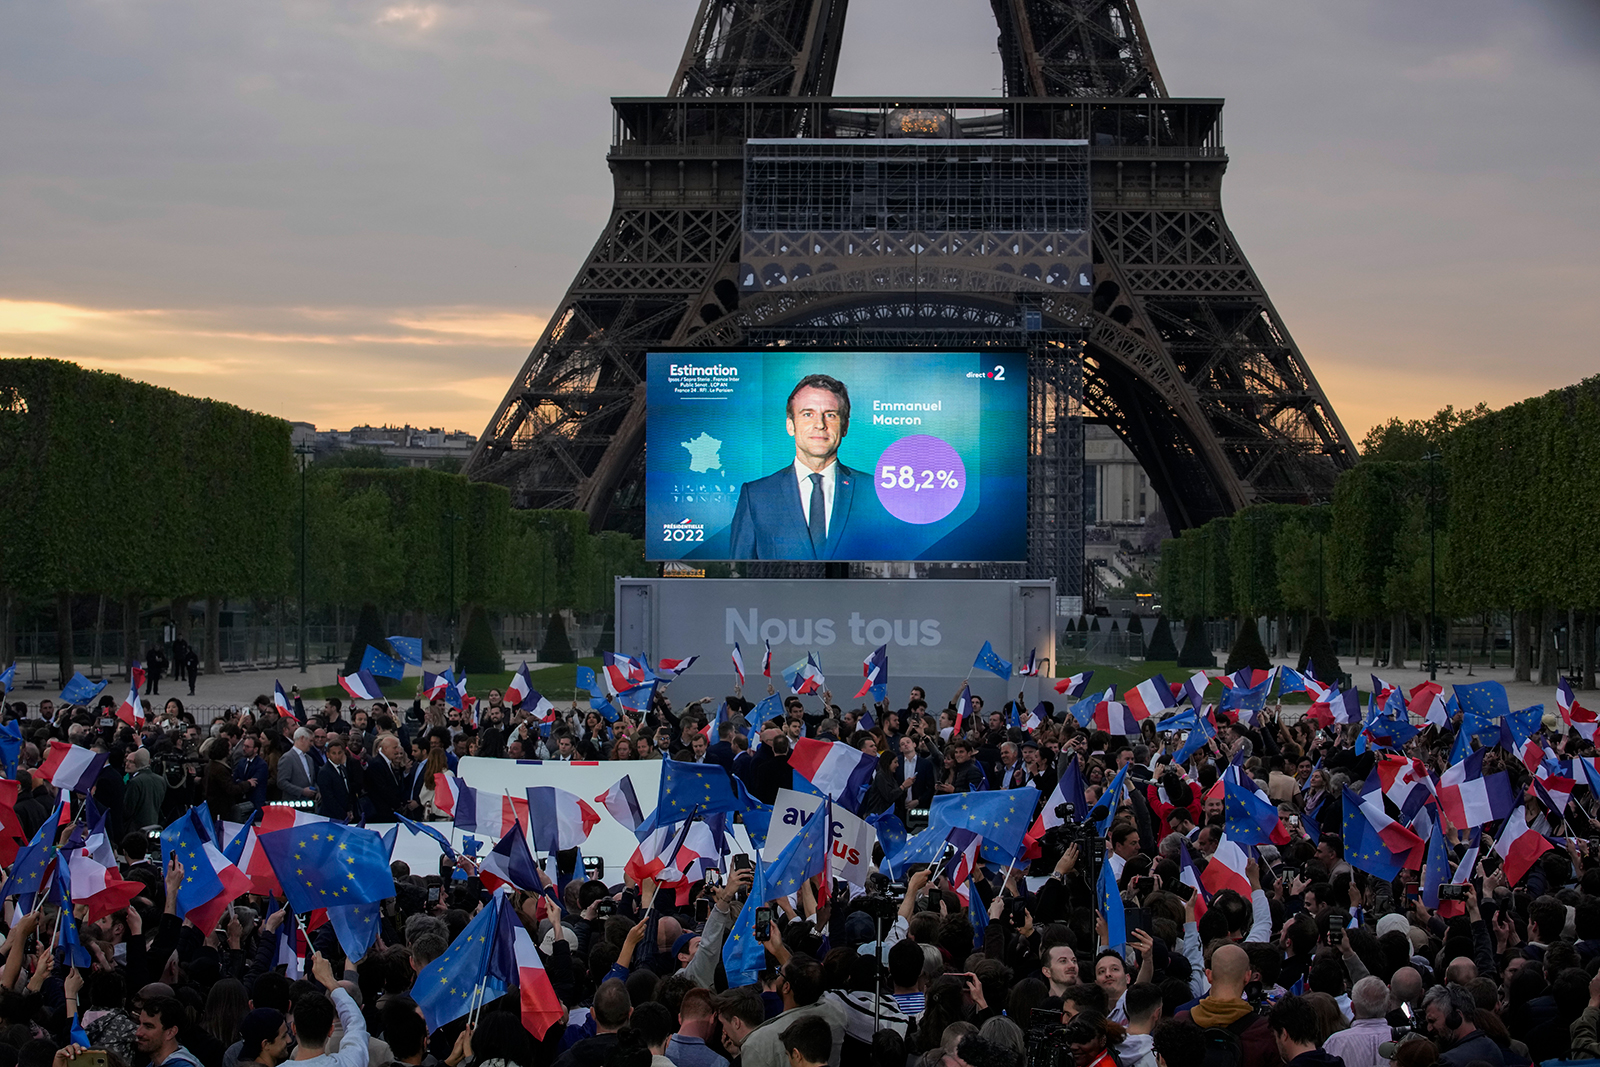 Supporters of French President Emmanuel Macron watch a screen in front of the Eiffel Tower as the first election projections are announced in Paris, France, Sunday, April 24.